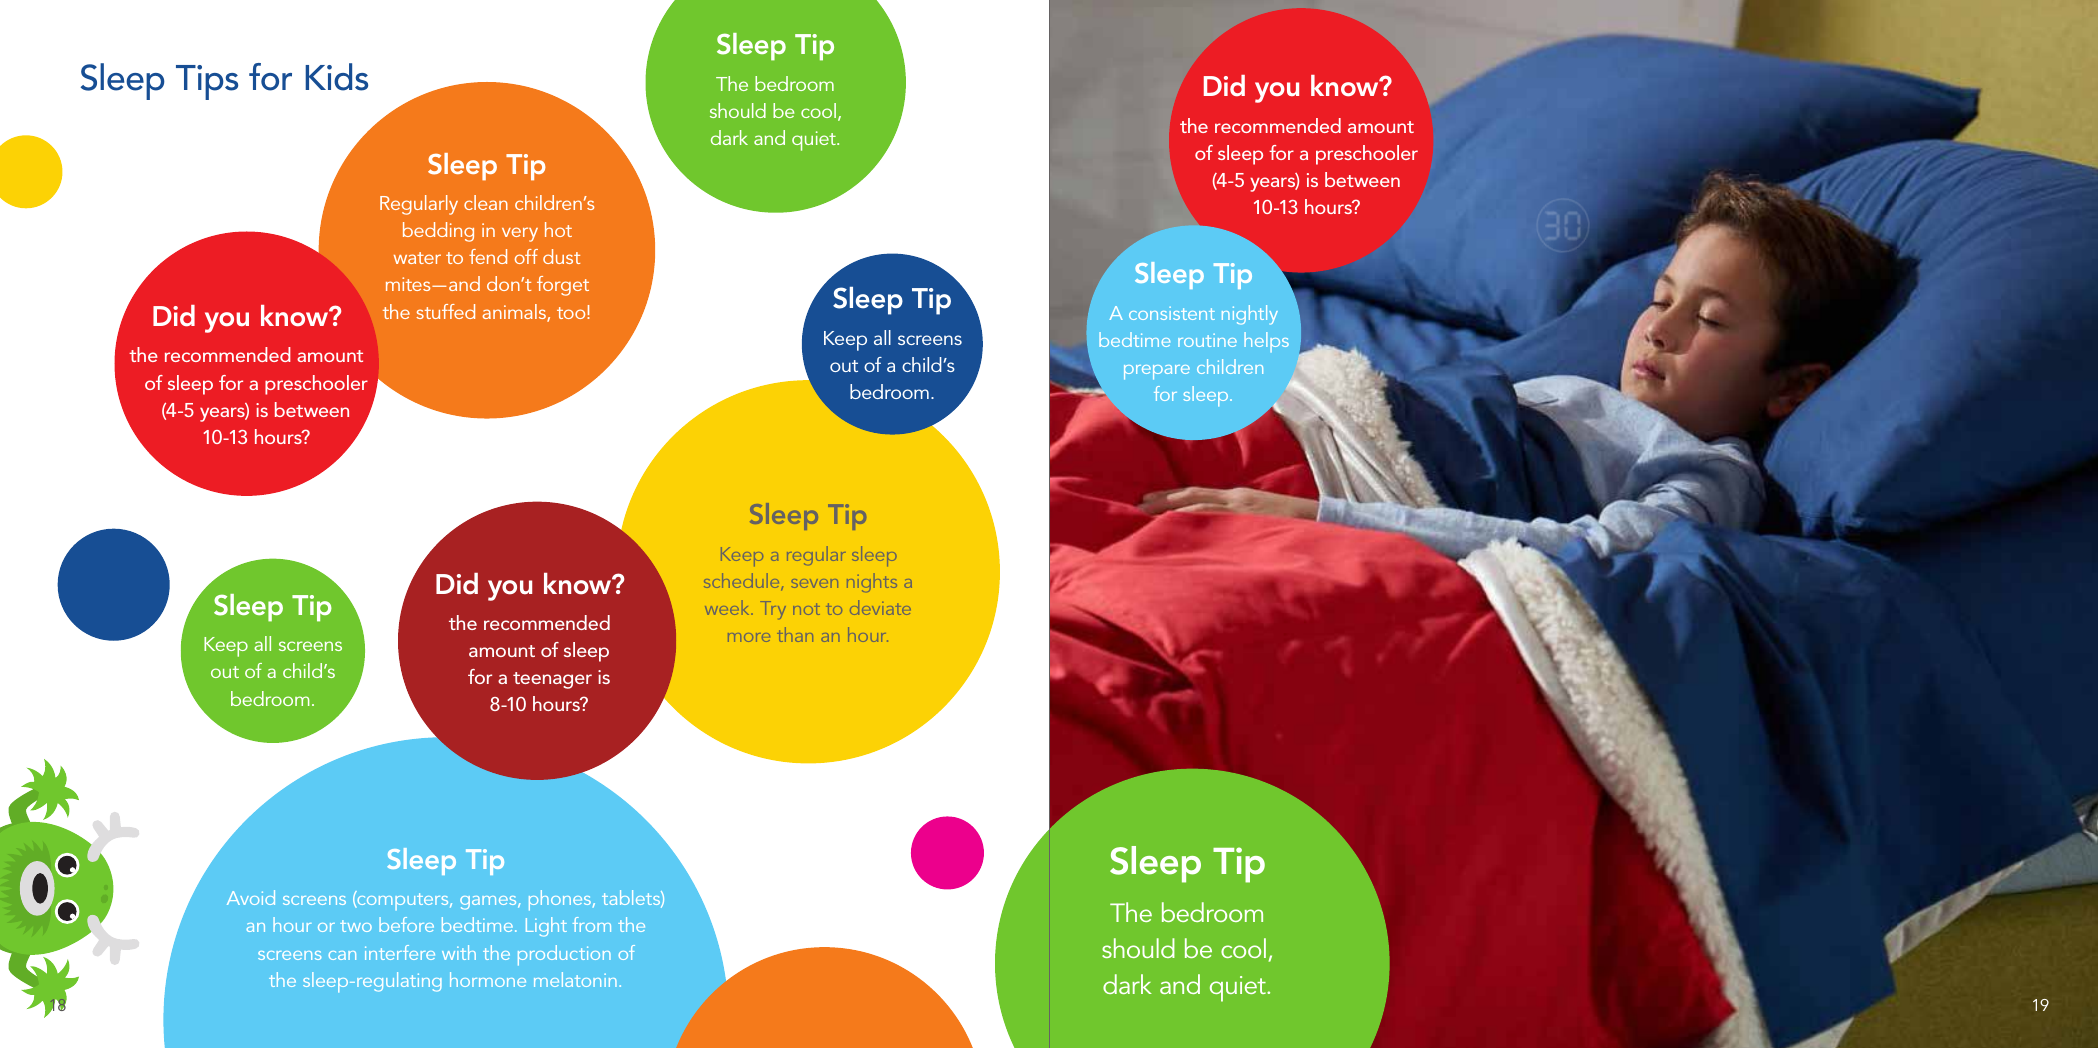 Sleep Tips for KidsIDid you know?the recommended amount  of sleep for a preschooler (4-5 years) is between  10-13 hours?Did you know?the recommended amount  of sleep for a preschooler (4-5 years) is between  10-13 hours?Did you know?the recommended amount of sleep  for a teenager is  8-10 hours?Sleep TipThe bedroom  should be cool,  dark and quiet.Sleep TipThe bedroom  should be cool,  dark and quiet.Sleep TipKeep a regular sleep schedule, seven nights a week. Try not to deviate more than an hour.Sleep TipKeep all screens out of a child’s bedroom.Sleep TipAvoid screens (computers, games, phones, tablets) an hour or two before bedtime. Light from the screens can interfere with the production of  the sleep-regulating hormone melatonin.  Sleep TipRegularly clean children’s bedding in very hot water to fend off dust mites — and don’t forget the stuffed animals, too! Sleep TipKeep all screens out of a child’s bedroom.Sleep TipA consistent nightly bedtime routine helps prepare children  for sleep.18 19